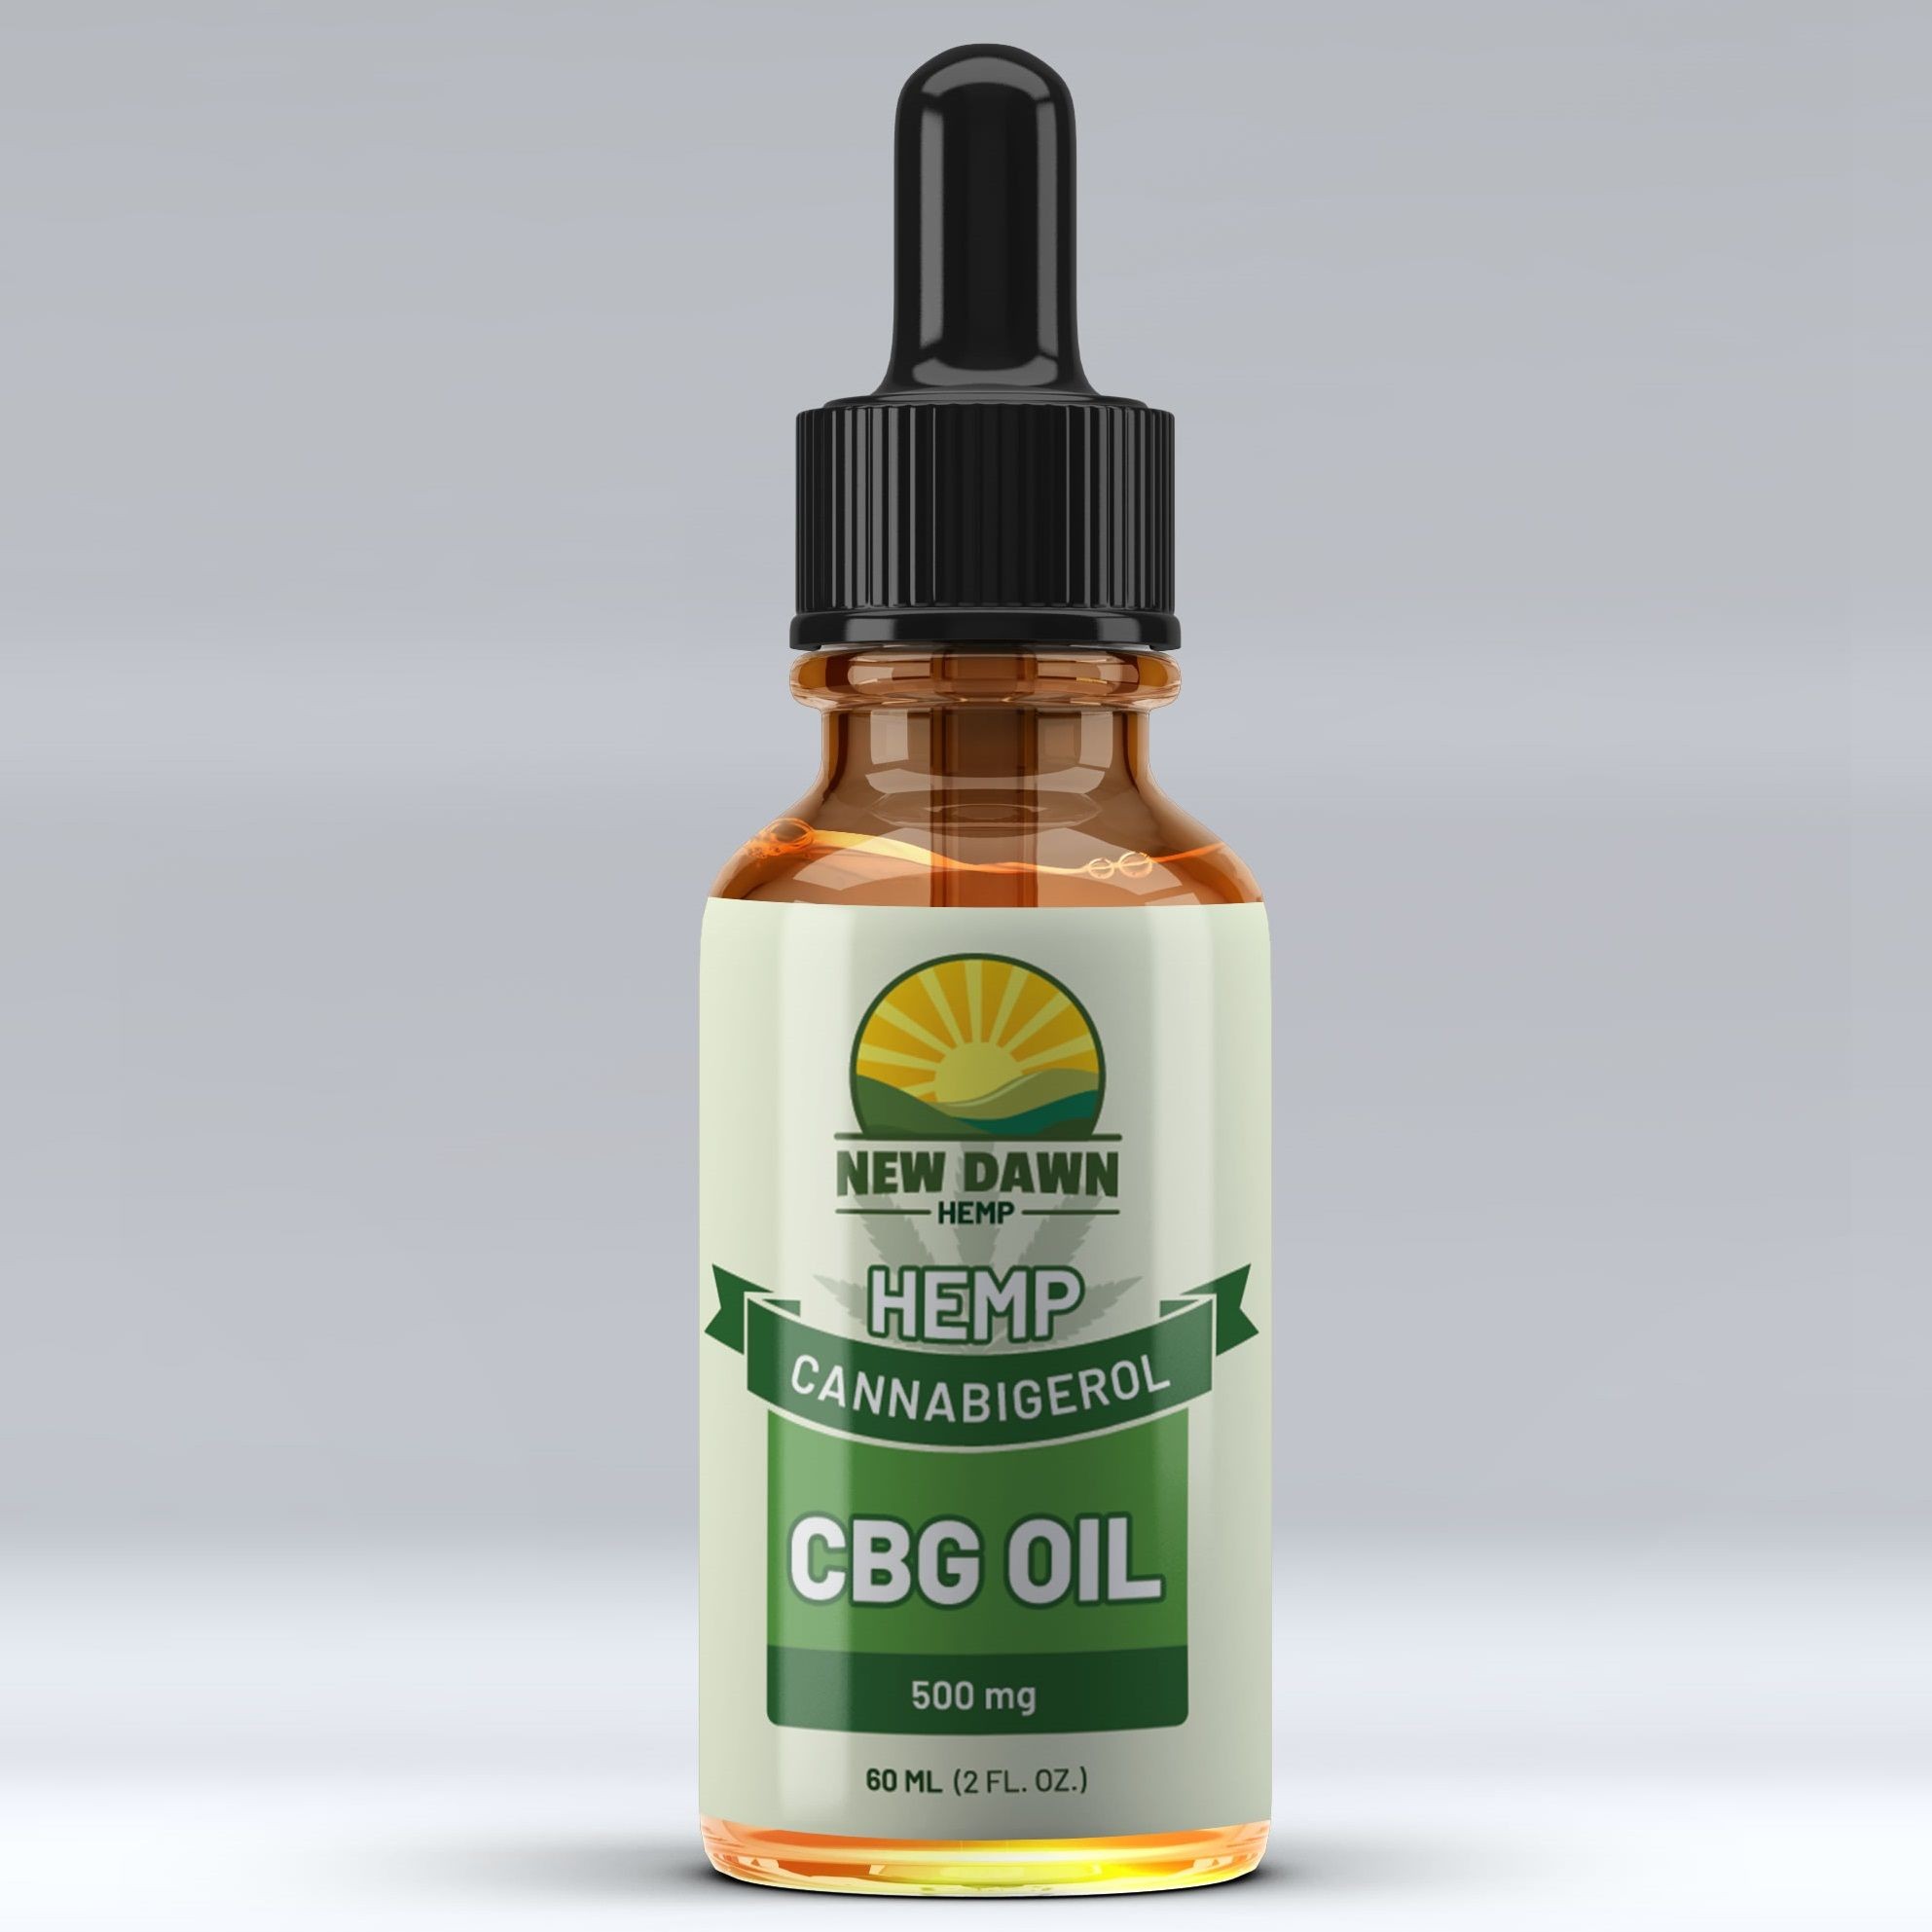 Cbg Products Weedmaps - Cbg|Gummies|Cbd|Effects|Thc|Cannabinoid|Hemp|Cannabinoids|Image|Products|Courtesy|Product|Way|Benefits|Dosage|Everyone|Oil|People|Spectrum|Others|Gummy|Time|Dosages|Advantages|Cannabis|Results|Treatment|Body|Stomach|Tincture|Pain|Drug|Approach|Isolate|Side|Dog|Ingredients|List|State|Cannabigerol|Cbg Gummies|Psychoactive Effects|Full Spectrum Gummies|Image Courtesy|Full-Spectrum Cbd Products|Different Dosages|Right Dosage|Empty Stomach|Cbd Gummies|Cbd Isolate|Side Effects|Different Effects|Dog Cbg Gummies|Drug Test|Full-Spectrum Cbd Product|Few Things|Chronic Pain|Full-Spectrum Cbd|Psychotropic Effects|Final Thoughts|Right Dosage Everyone|Final Tips|Same Results|Cbg Ratio|Appetite Loss|Powerful Hunger Stimulant|Whereas Cbd|Thc Ratio Gummies|Dangerous Consequence|Numerous Diseases